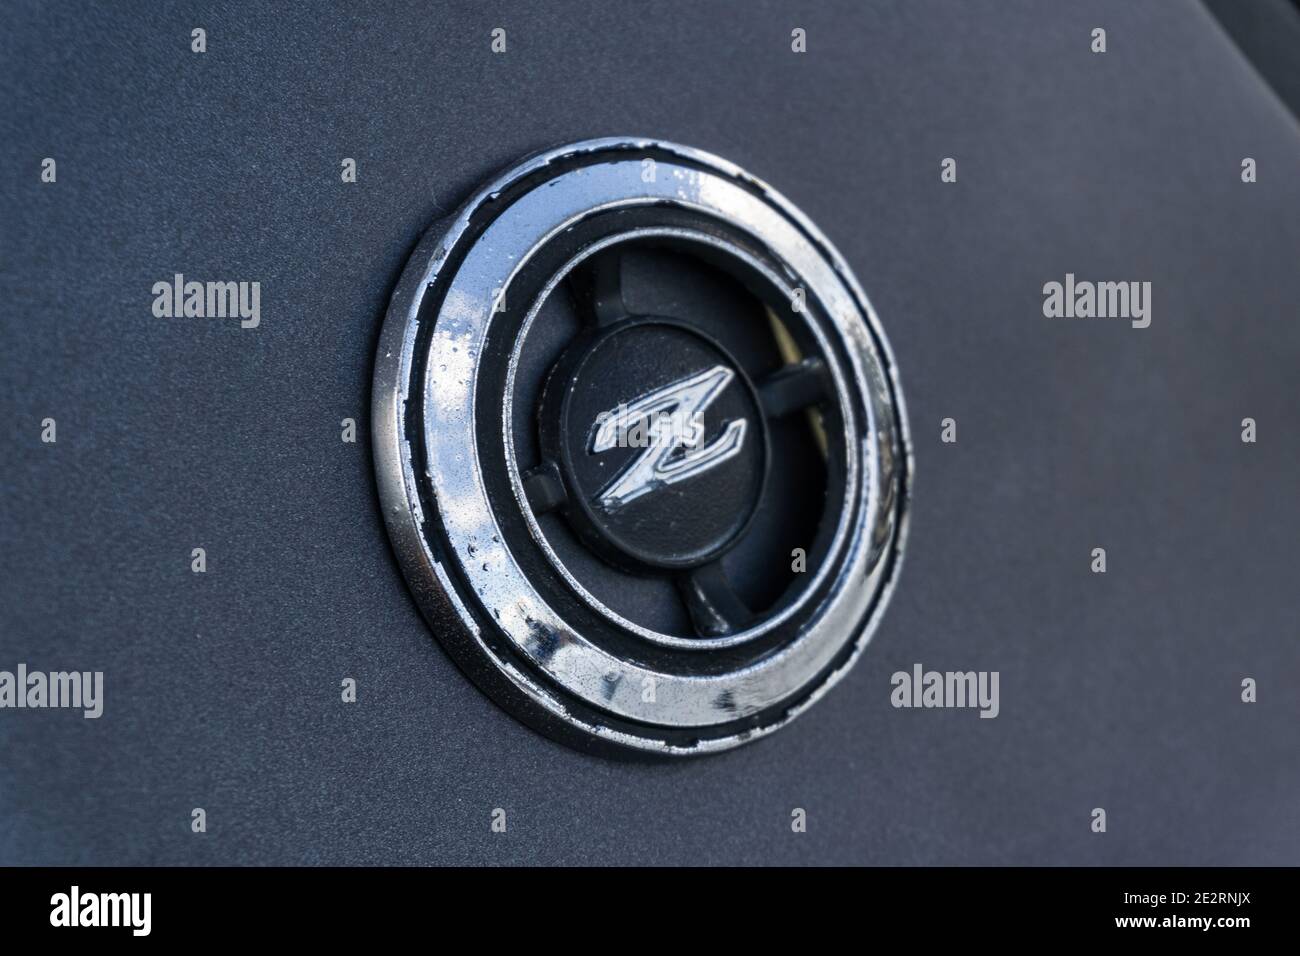 Close up detail of the Z emblem badge on a matte black customised Datsun Fairlady 280Z GT coupe 1970s sports car Stock Photo